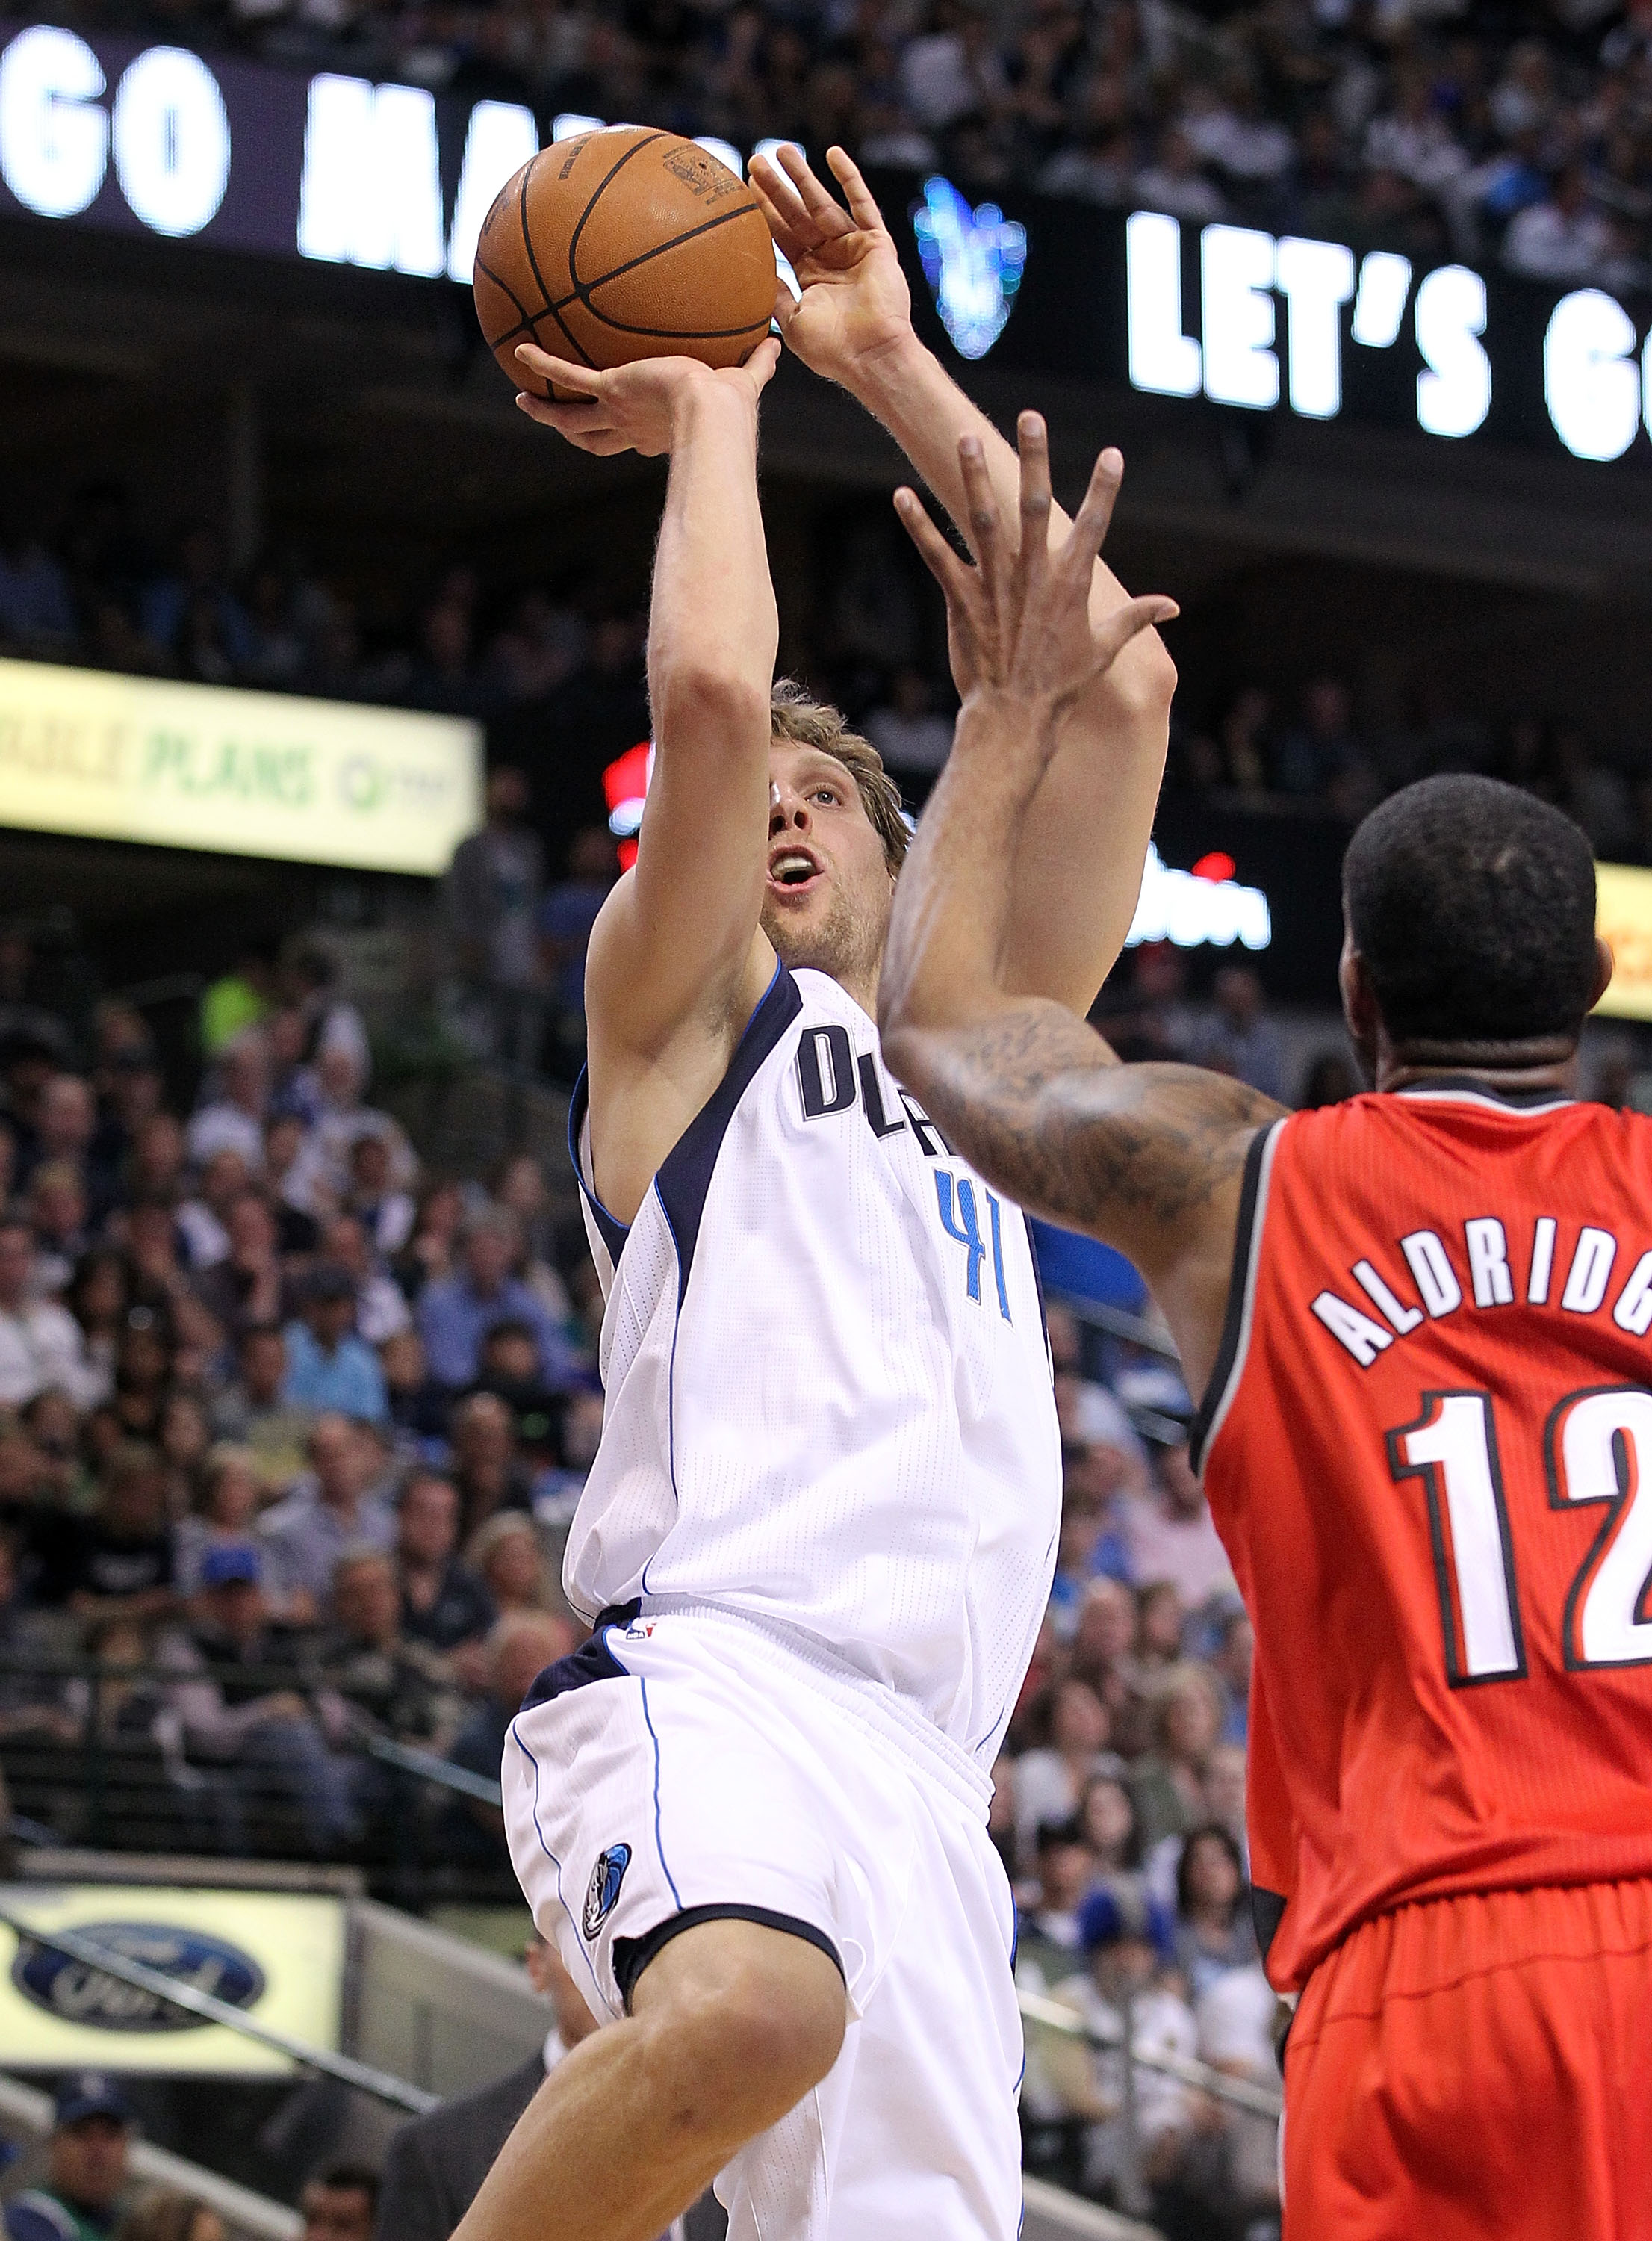 DALLAS, TX - APRIL 16:  Forward Dirk Nowitzki #41 of the Dallas Mavericks takes a shot against LaMarcus Aldridge #12 of the Portland Trail Blazers in Game One of the Western Conference Quarterfinals during the 2011 NBA Playoffs on April 16, 2011 at Americ